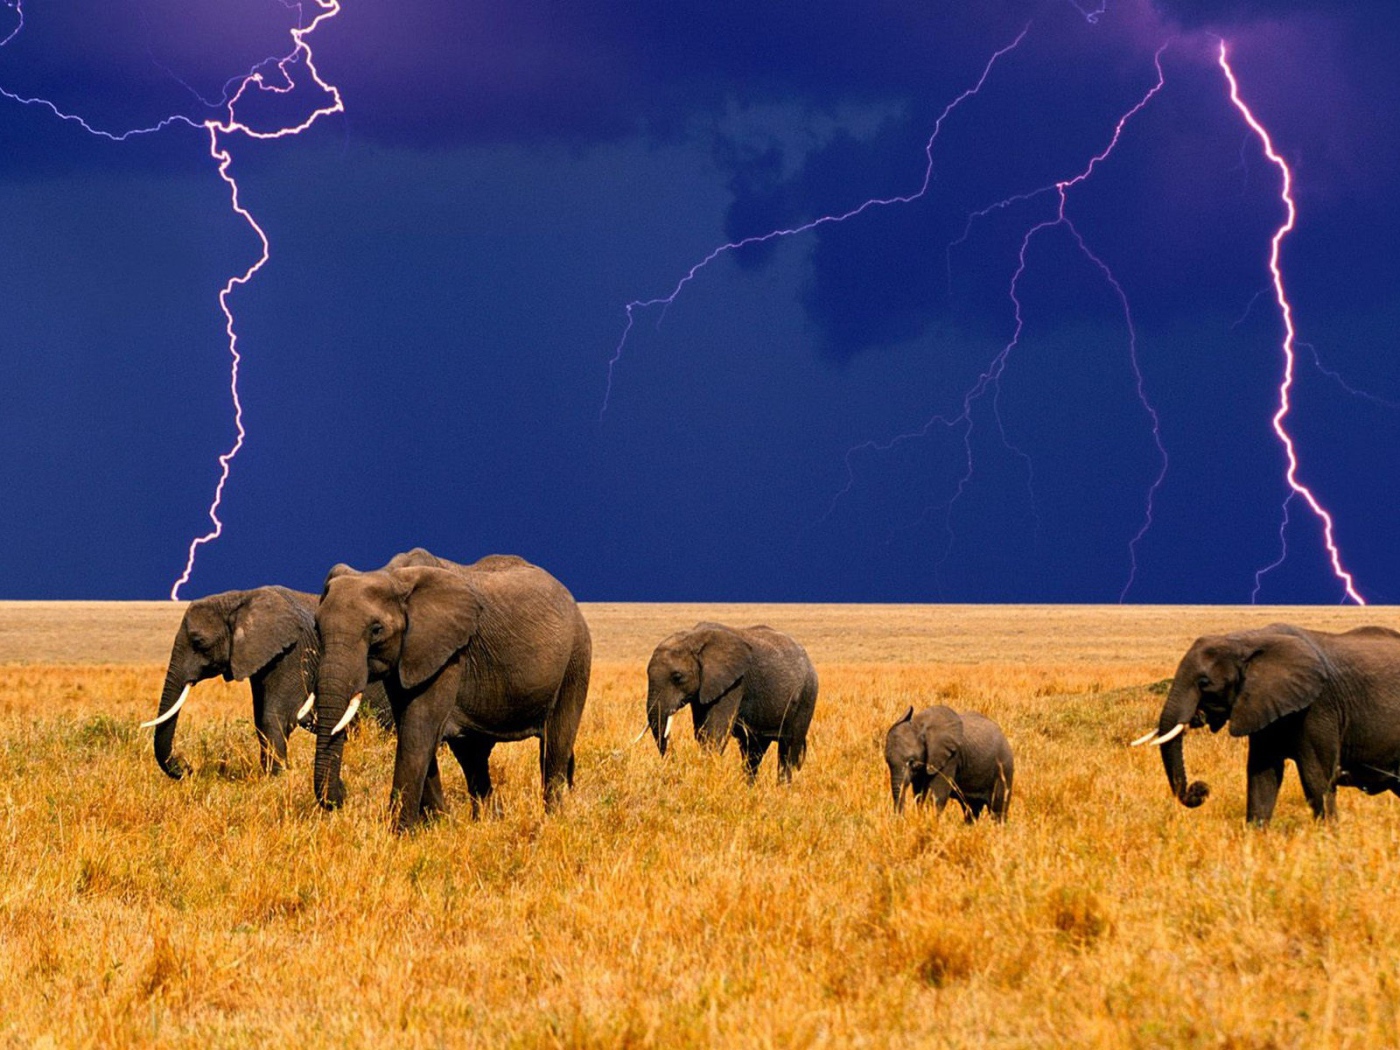 A herd of elephants on a background of storm